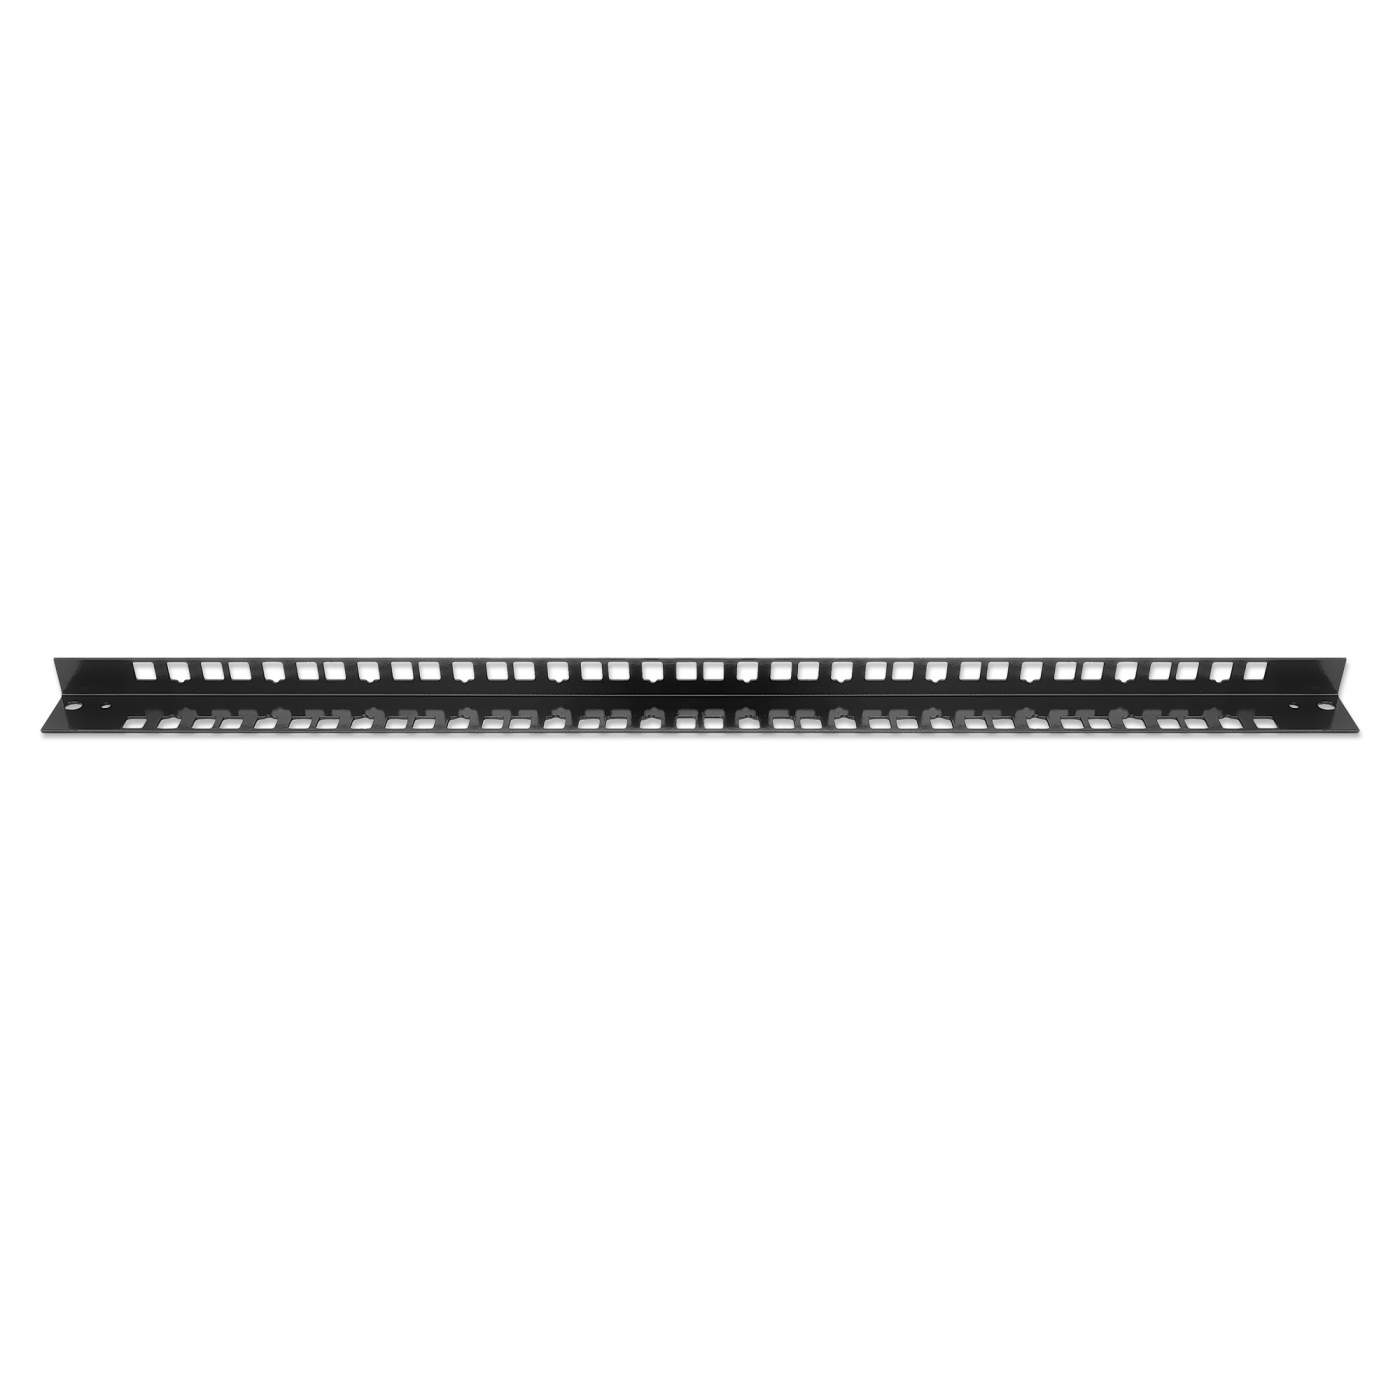 Spare Rails for 19" Wallmount Cabinets, 15U Image 3